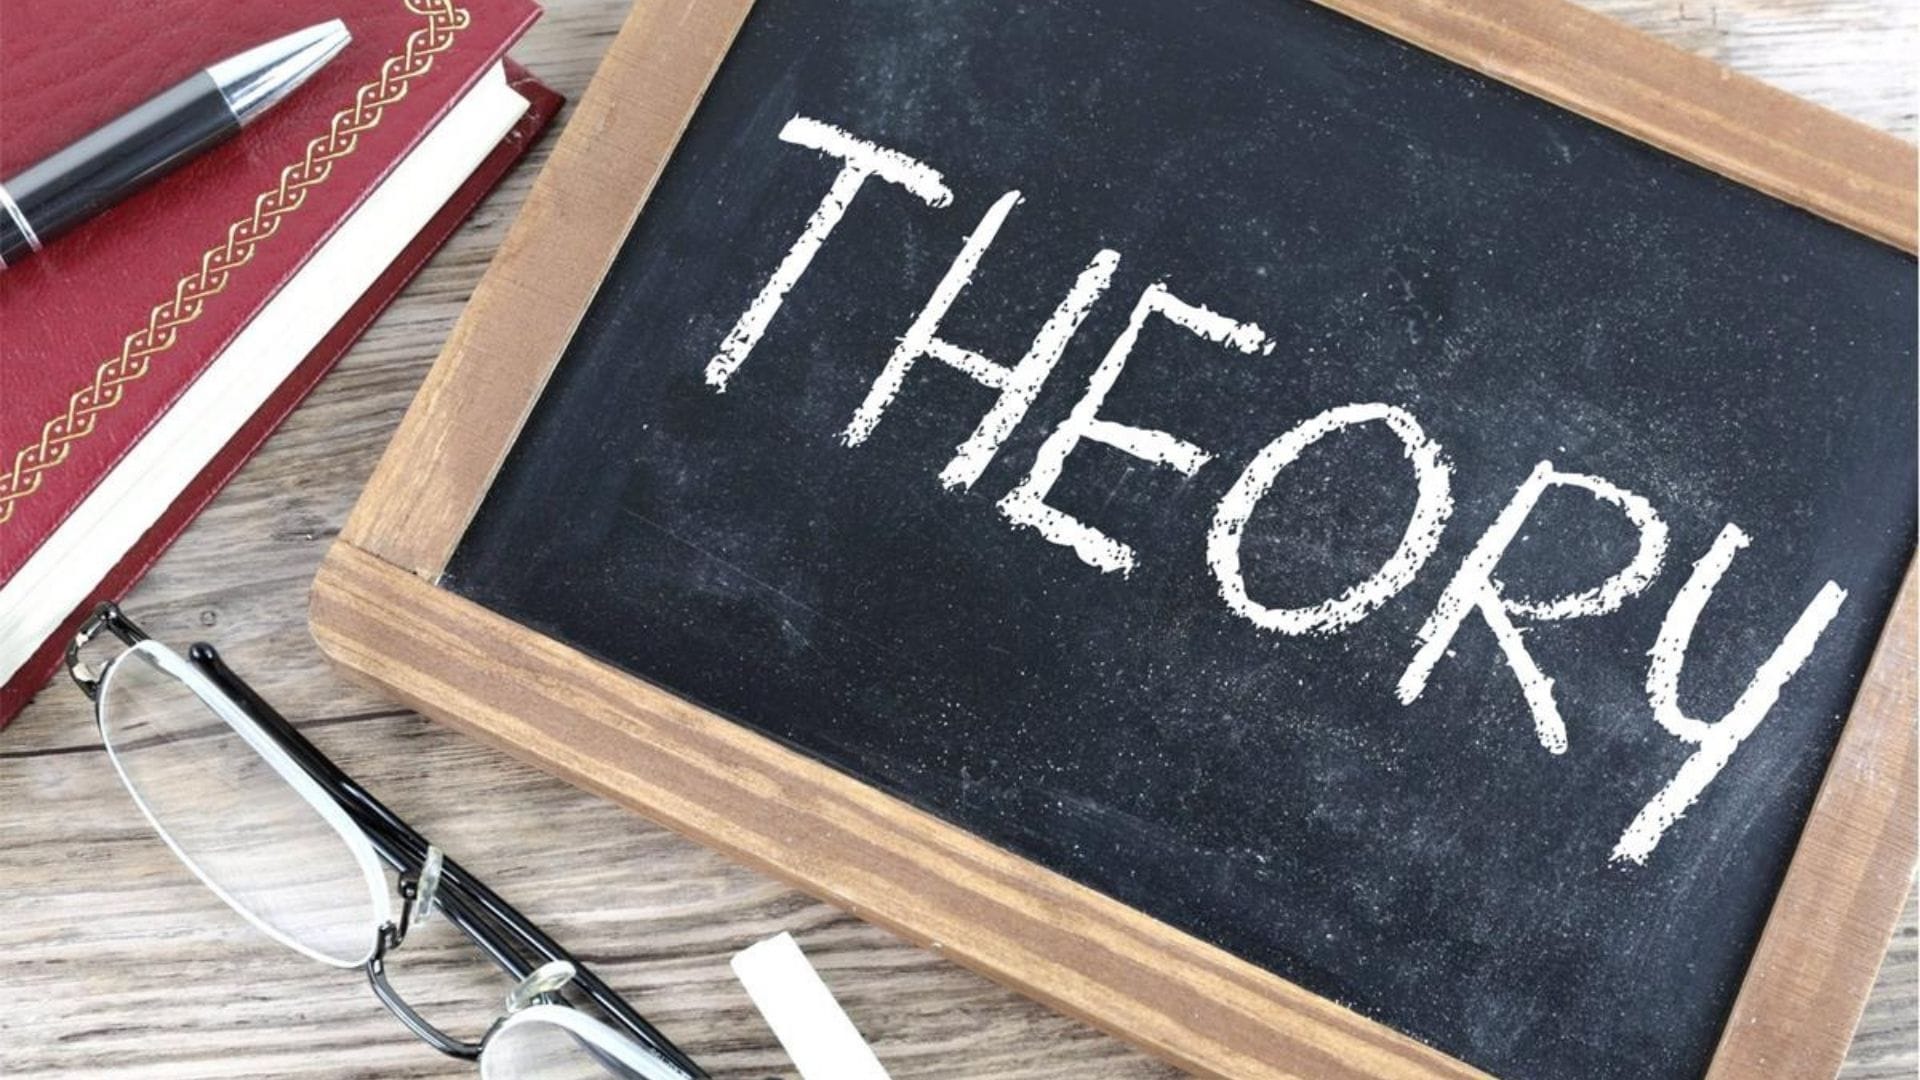 Theory - Definition, Types, Steps, and Characteristics | Marketing91